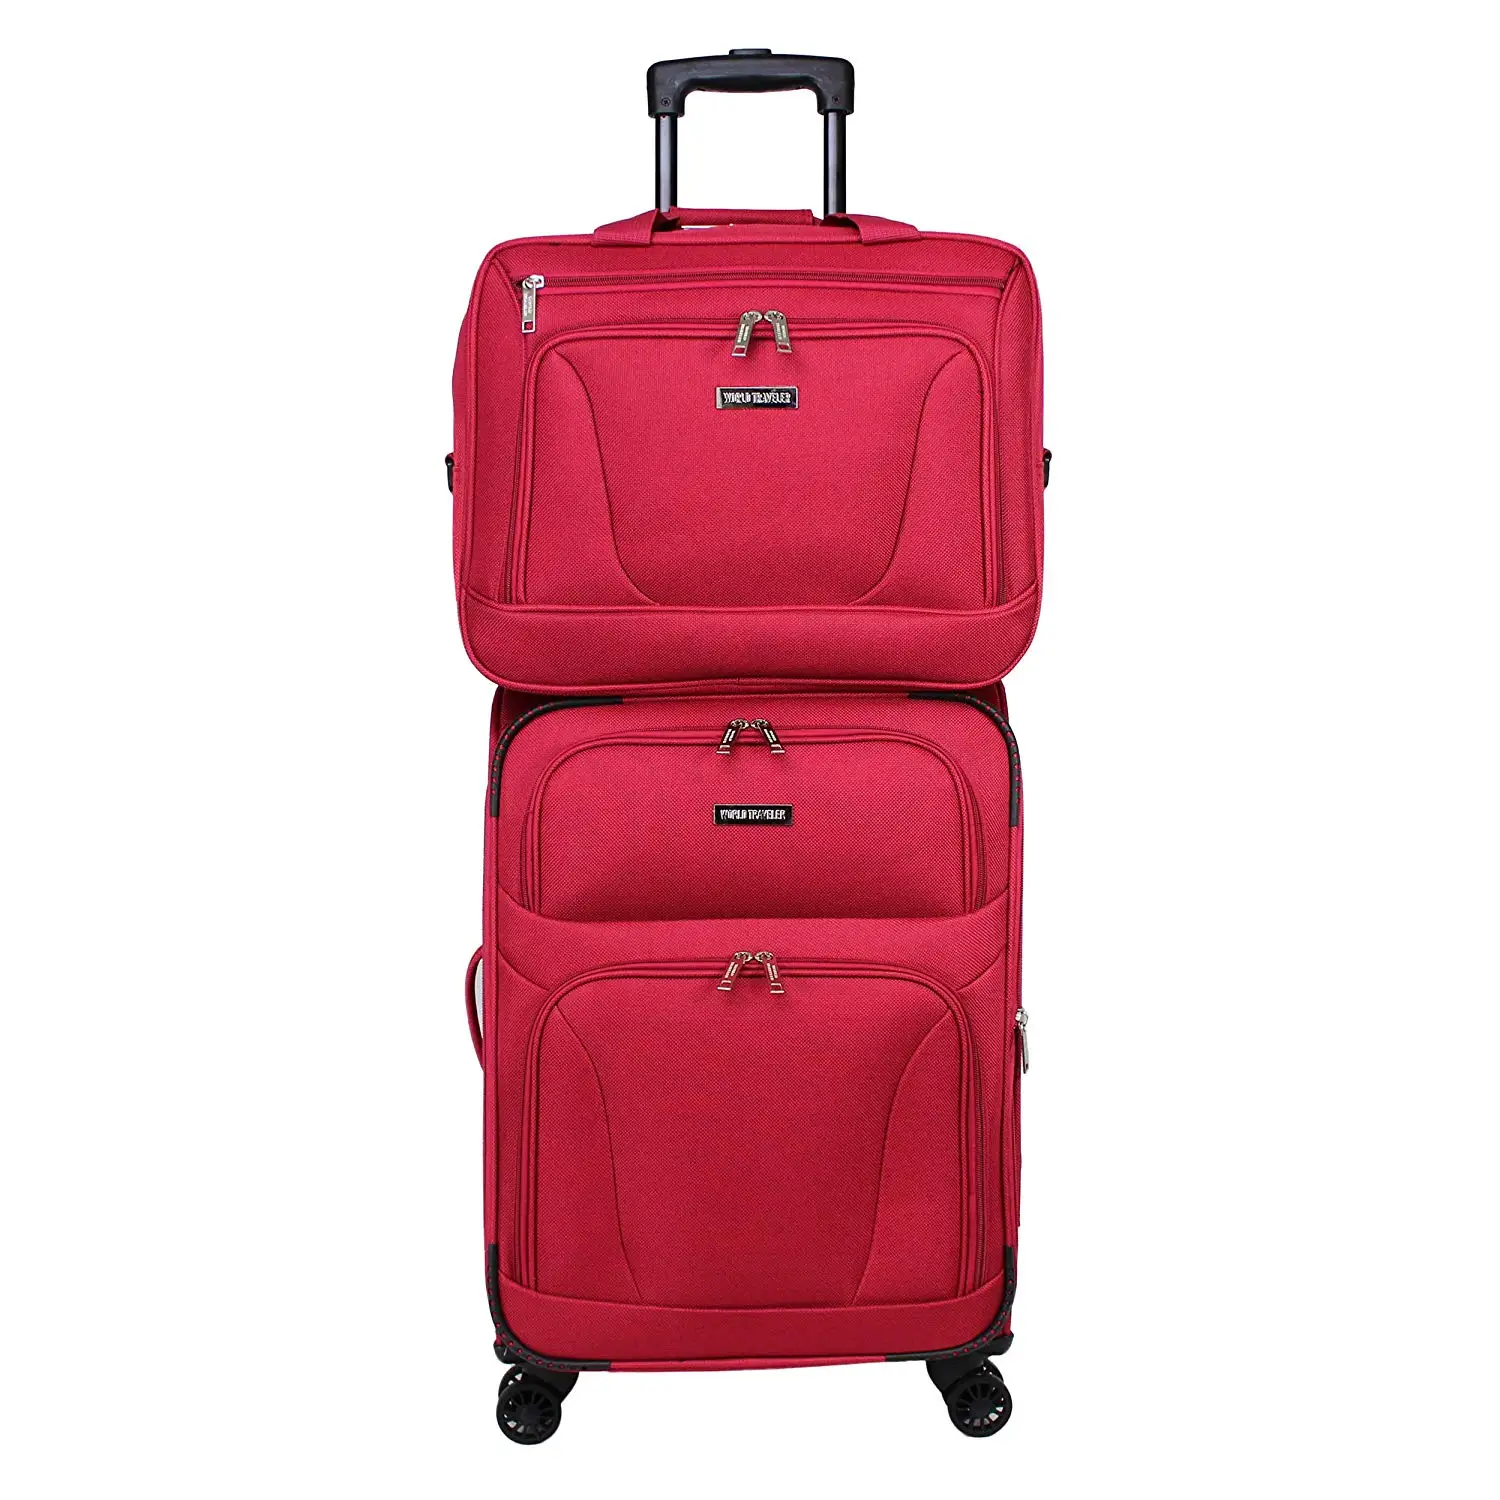 Cheap Lightweight Spinner Carry On Luggage Reviews, find Lightweight Spinner Carry On Luggage ...